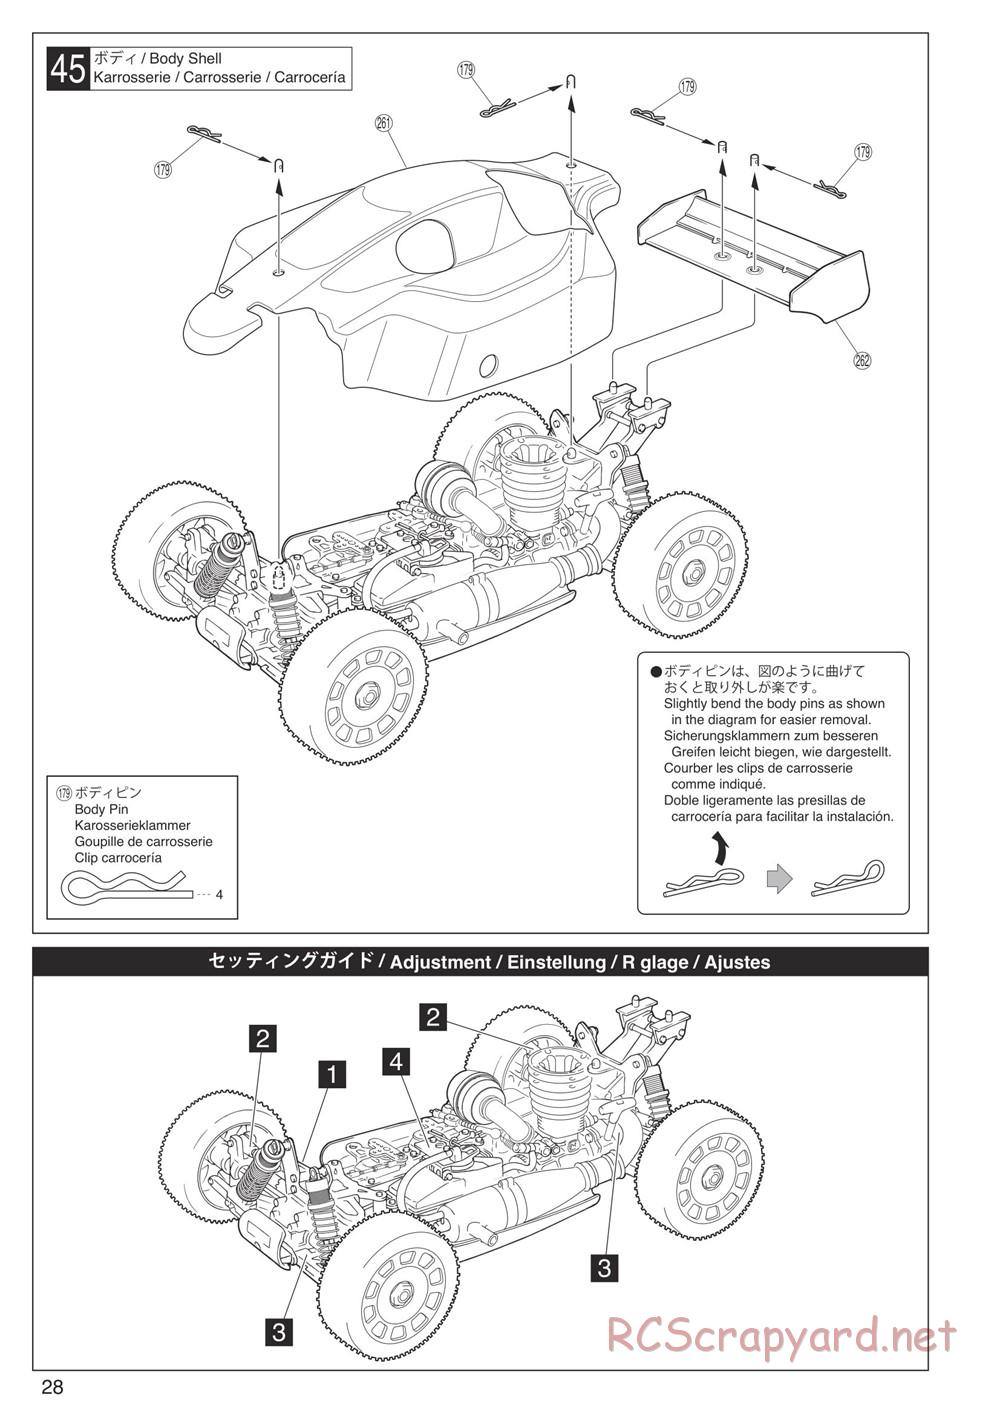 Kyosho - Inferno Neo - Manual - Page 28